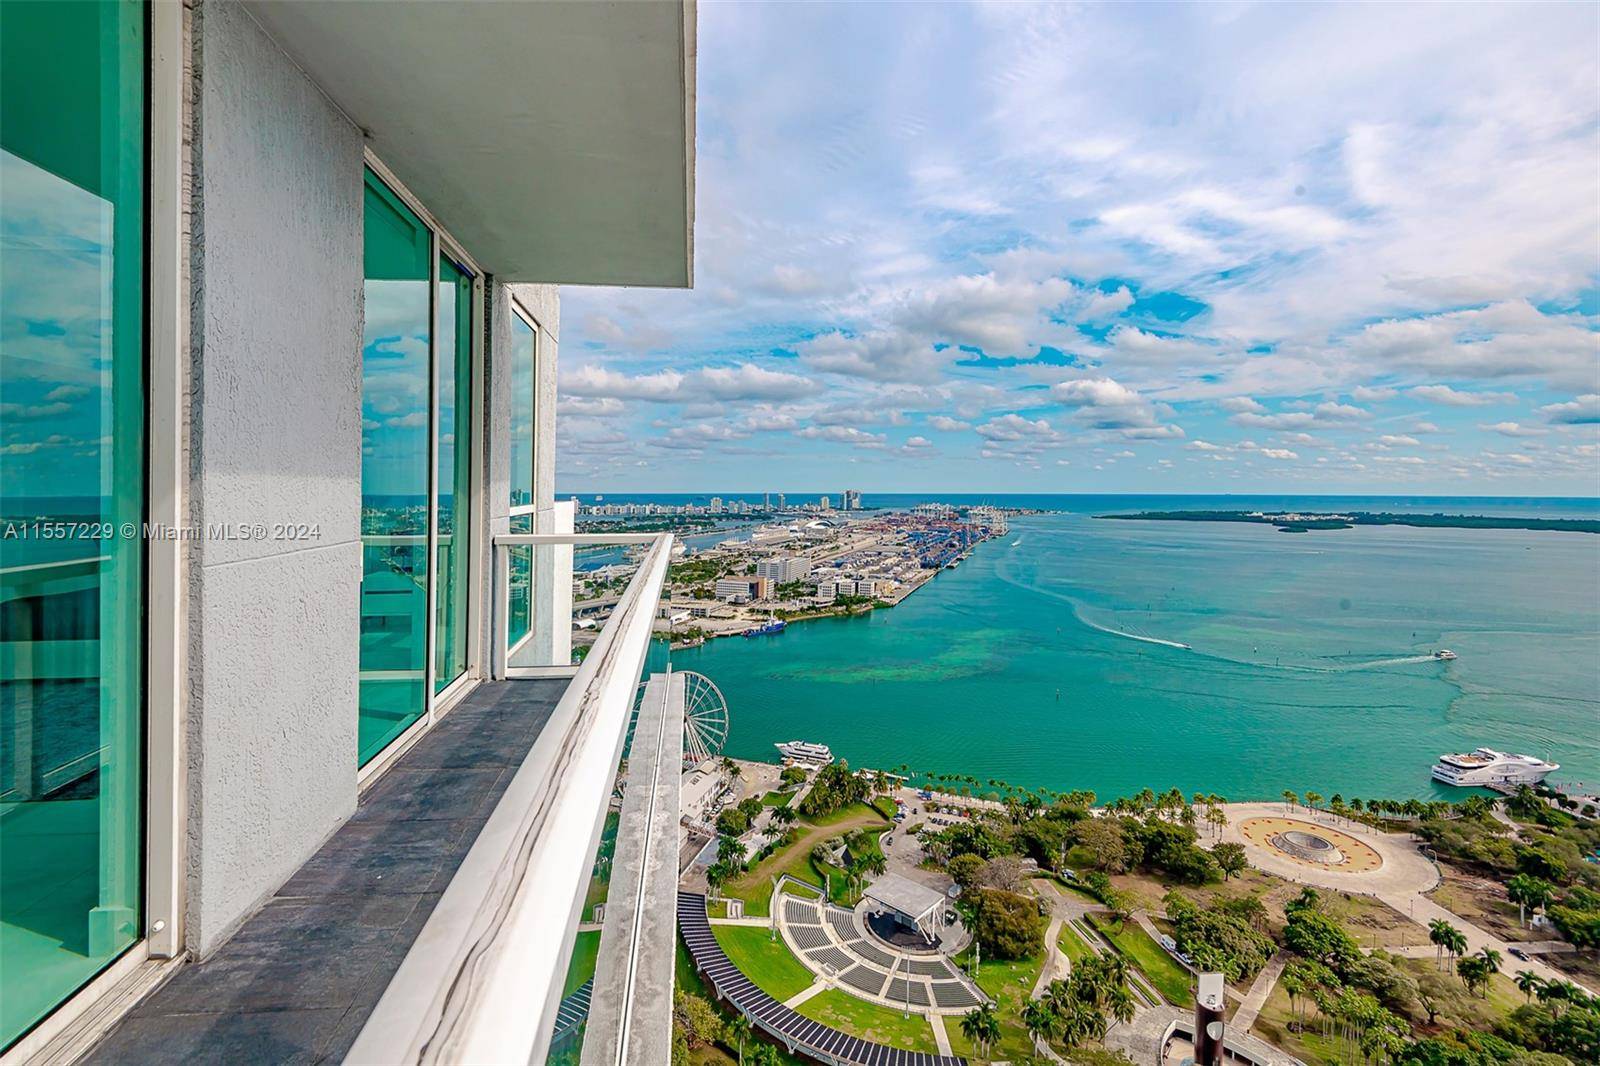 Opulent 3 bed 4. 5 bath three story Upper Penthouse with miles of wide open bay, ocean and city views.